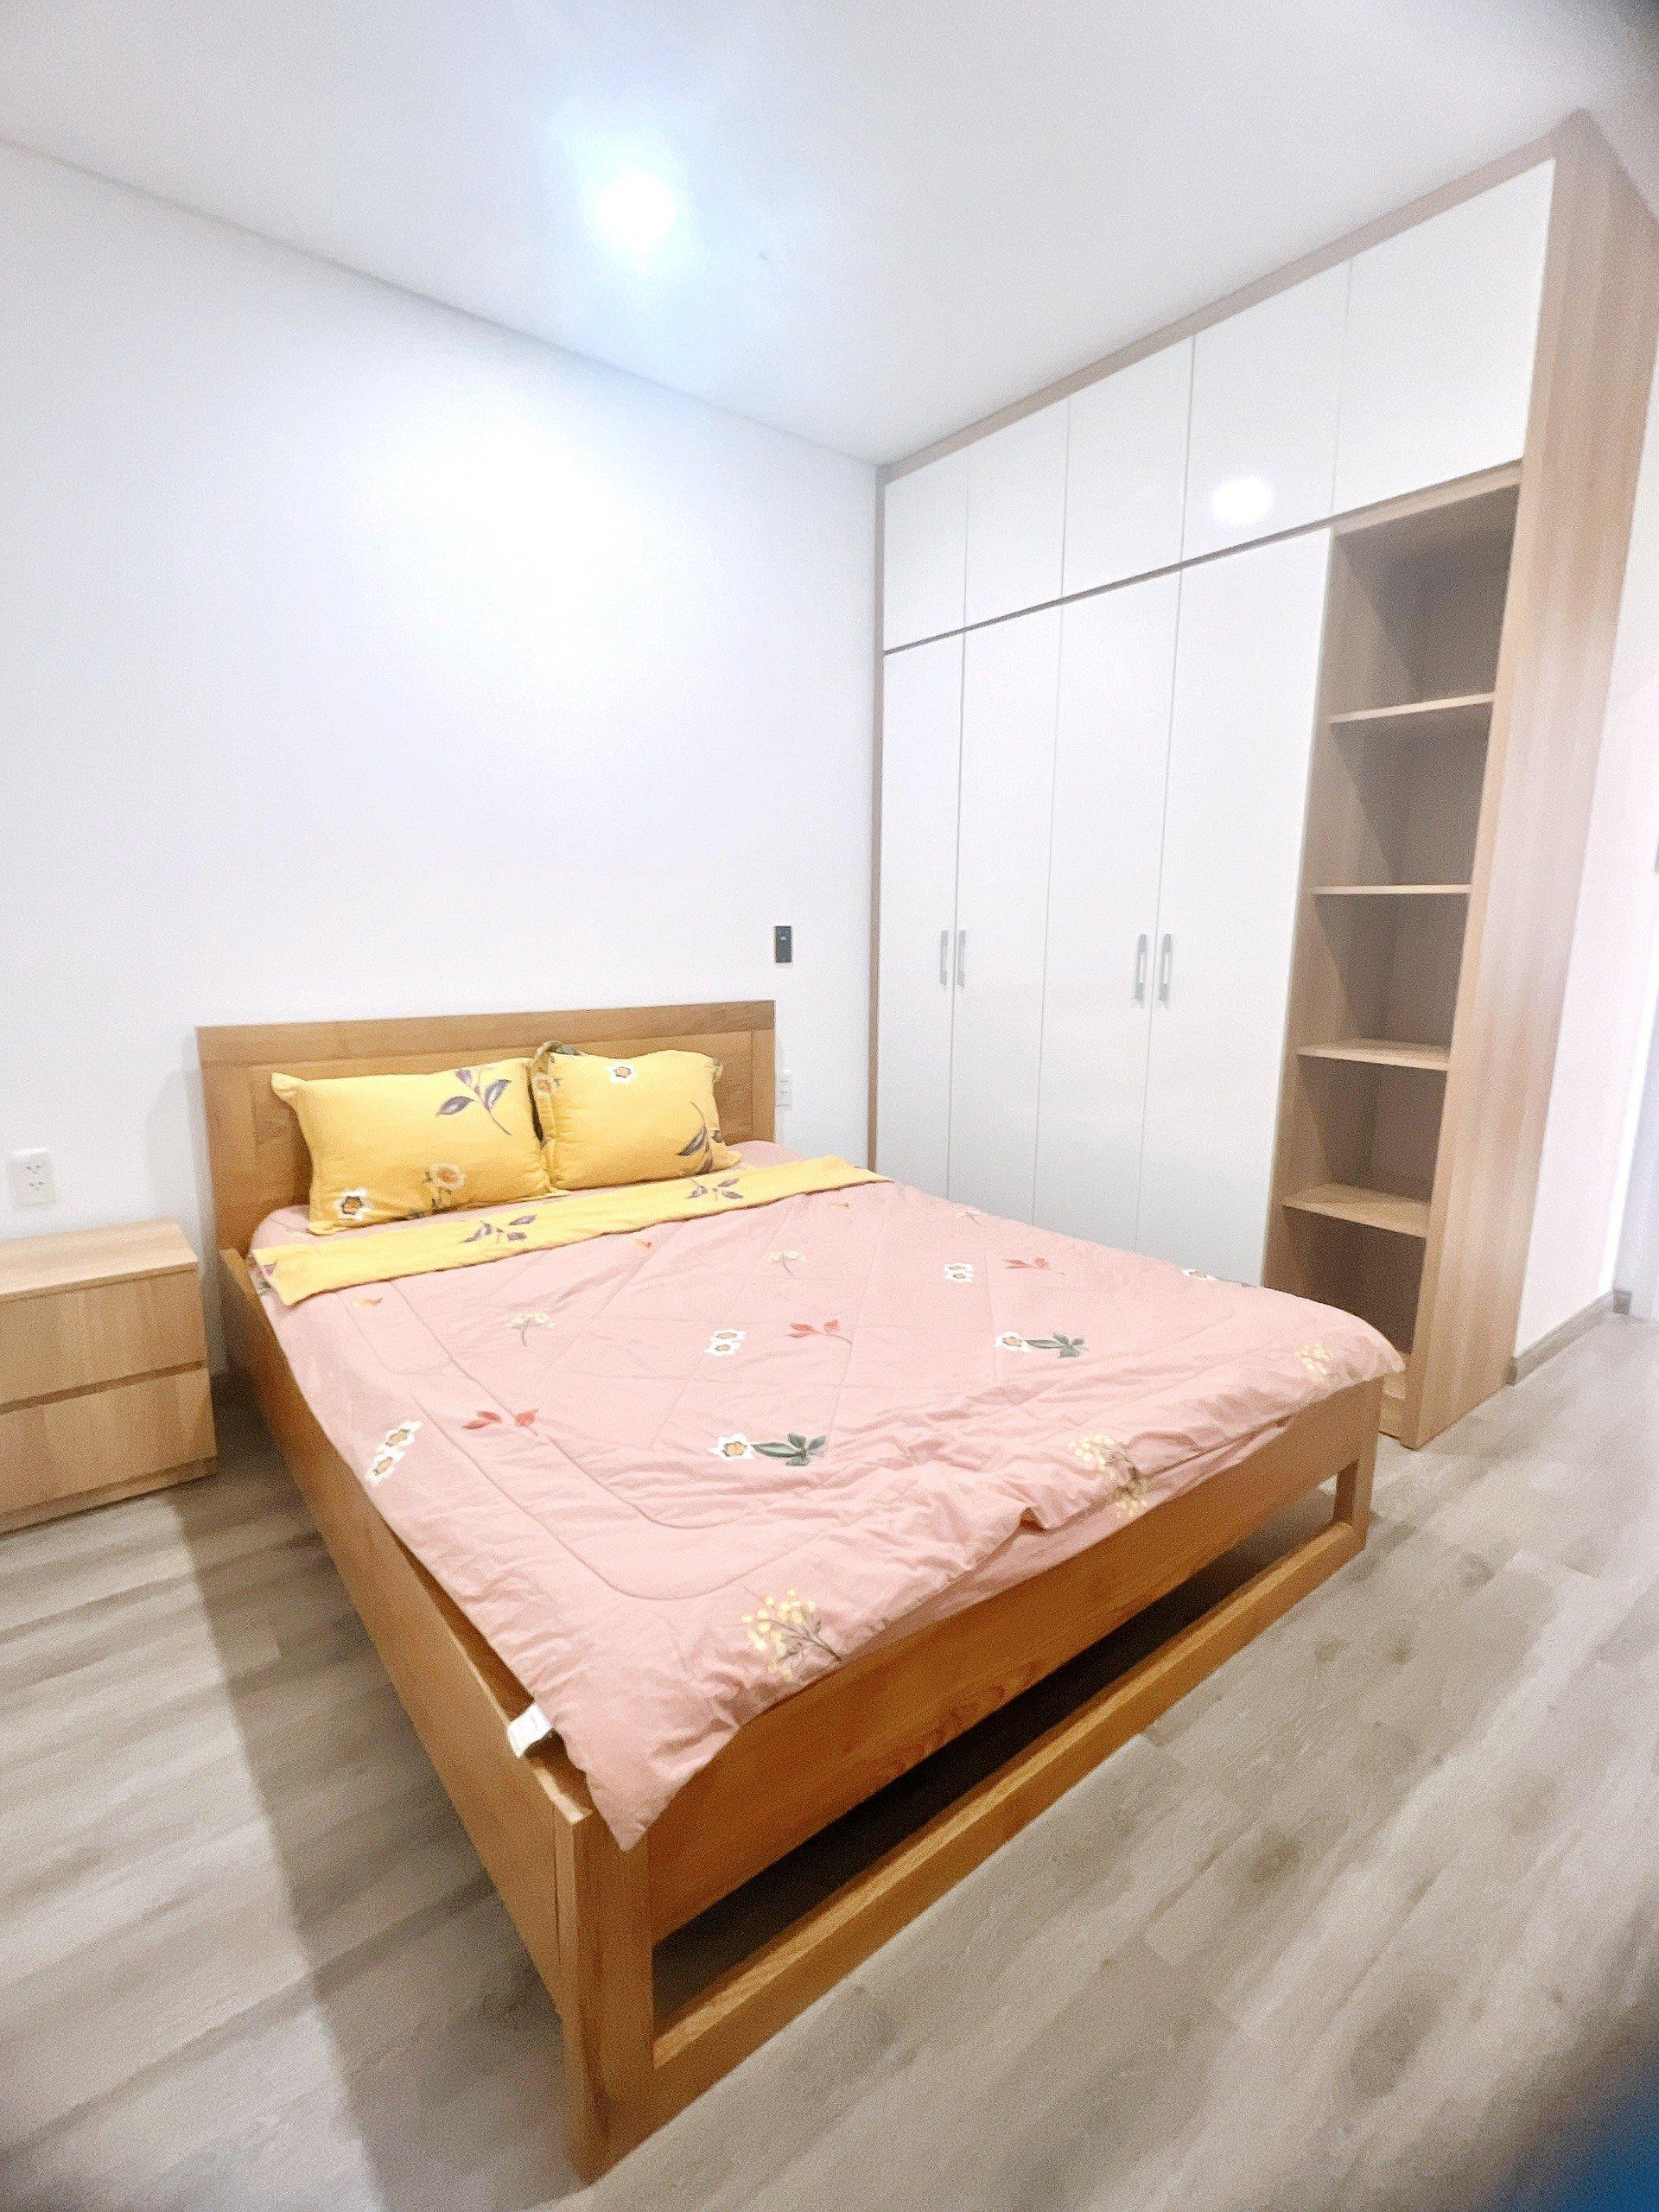 MONARCHY DANANG - 02 BEDROOM APARTMENT FOR RENT  - 100% NEW FURNITURE